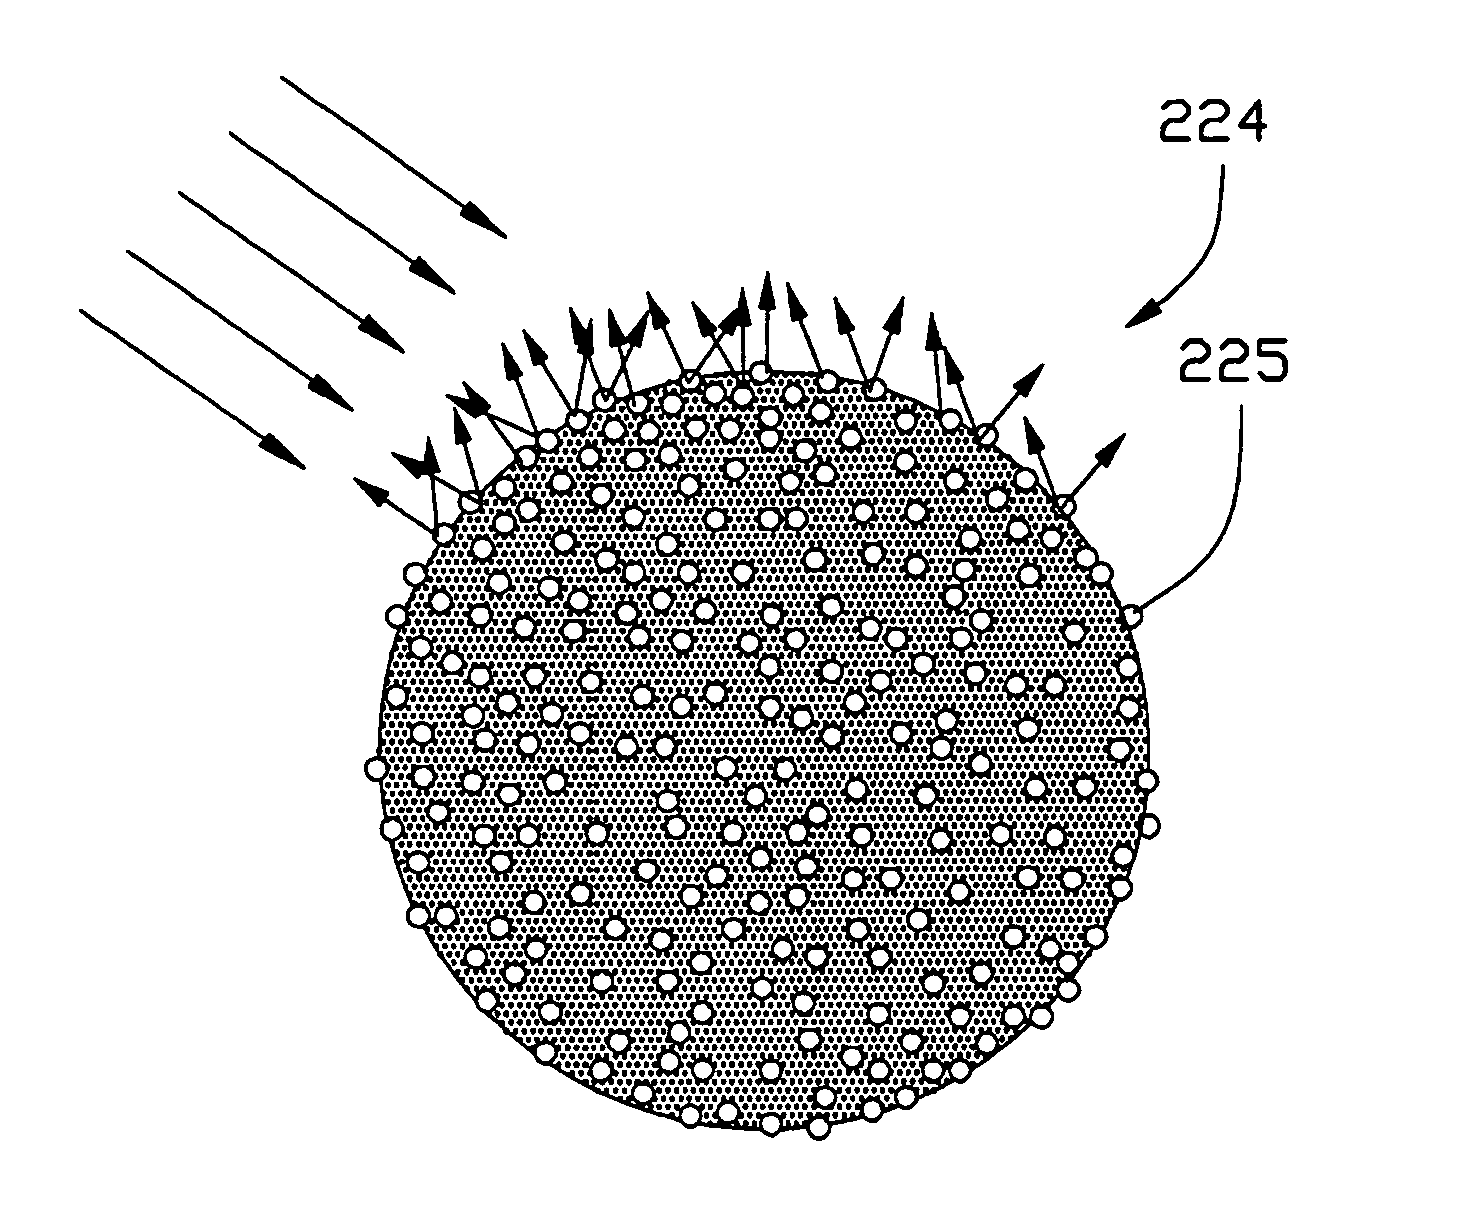 Light guide plate with diffusion dots having scattering particles and surface light source unit incorporating the light guide plate